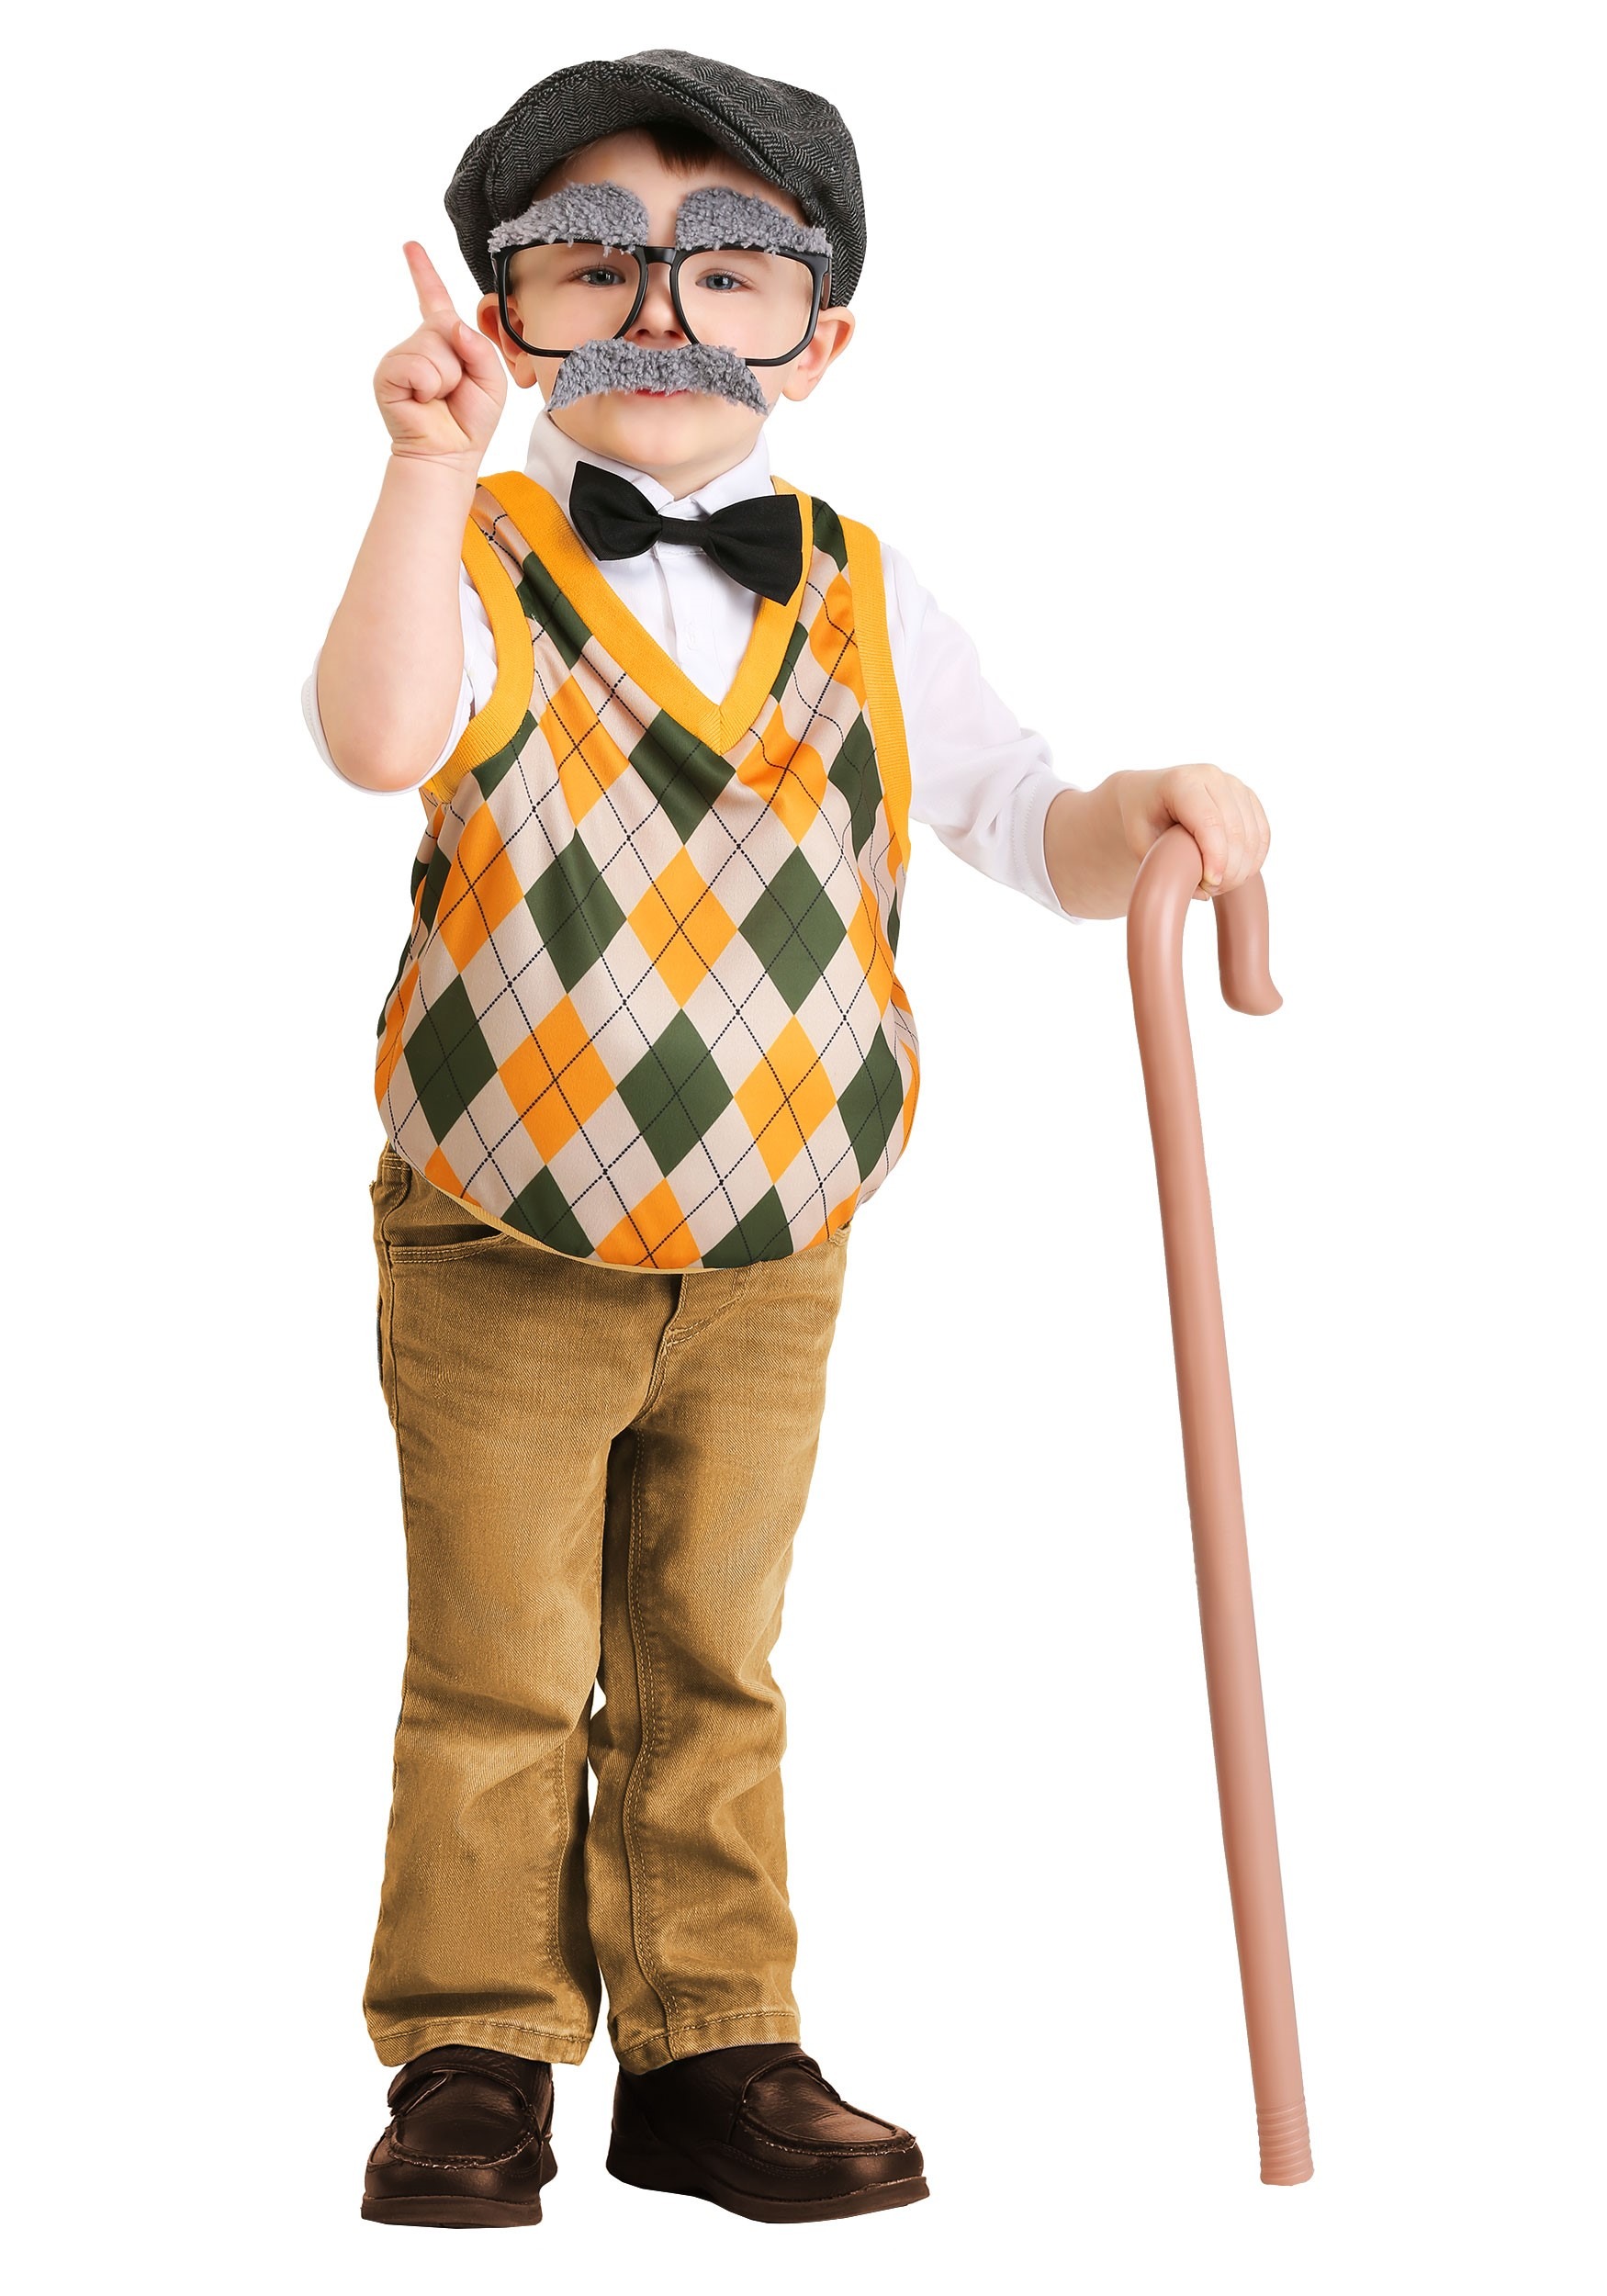 Toddler’s Old Man Costume